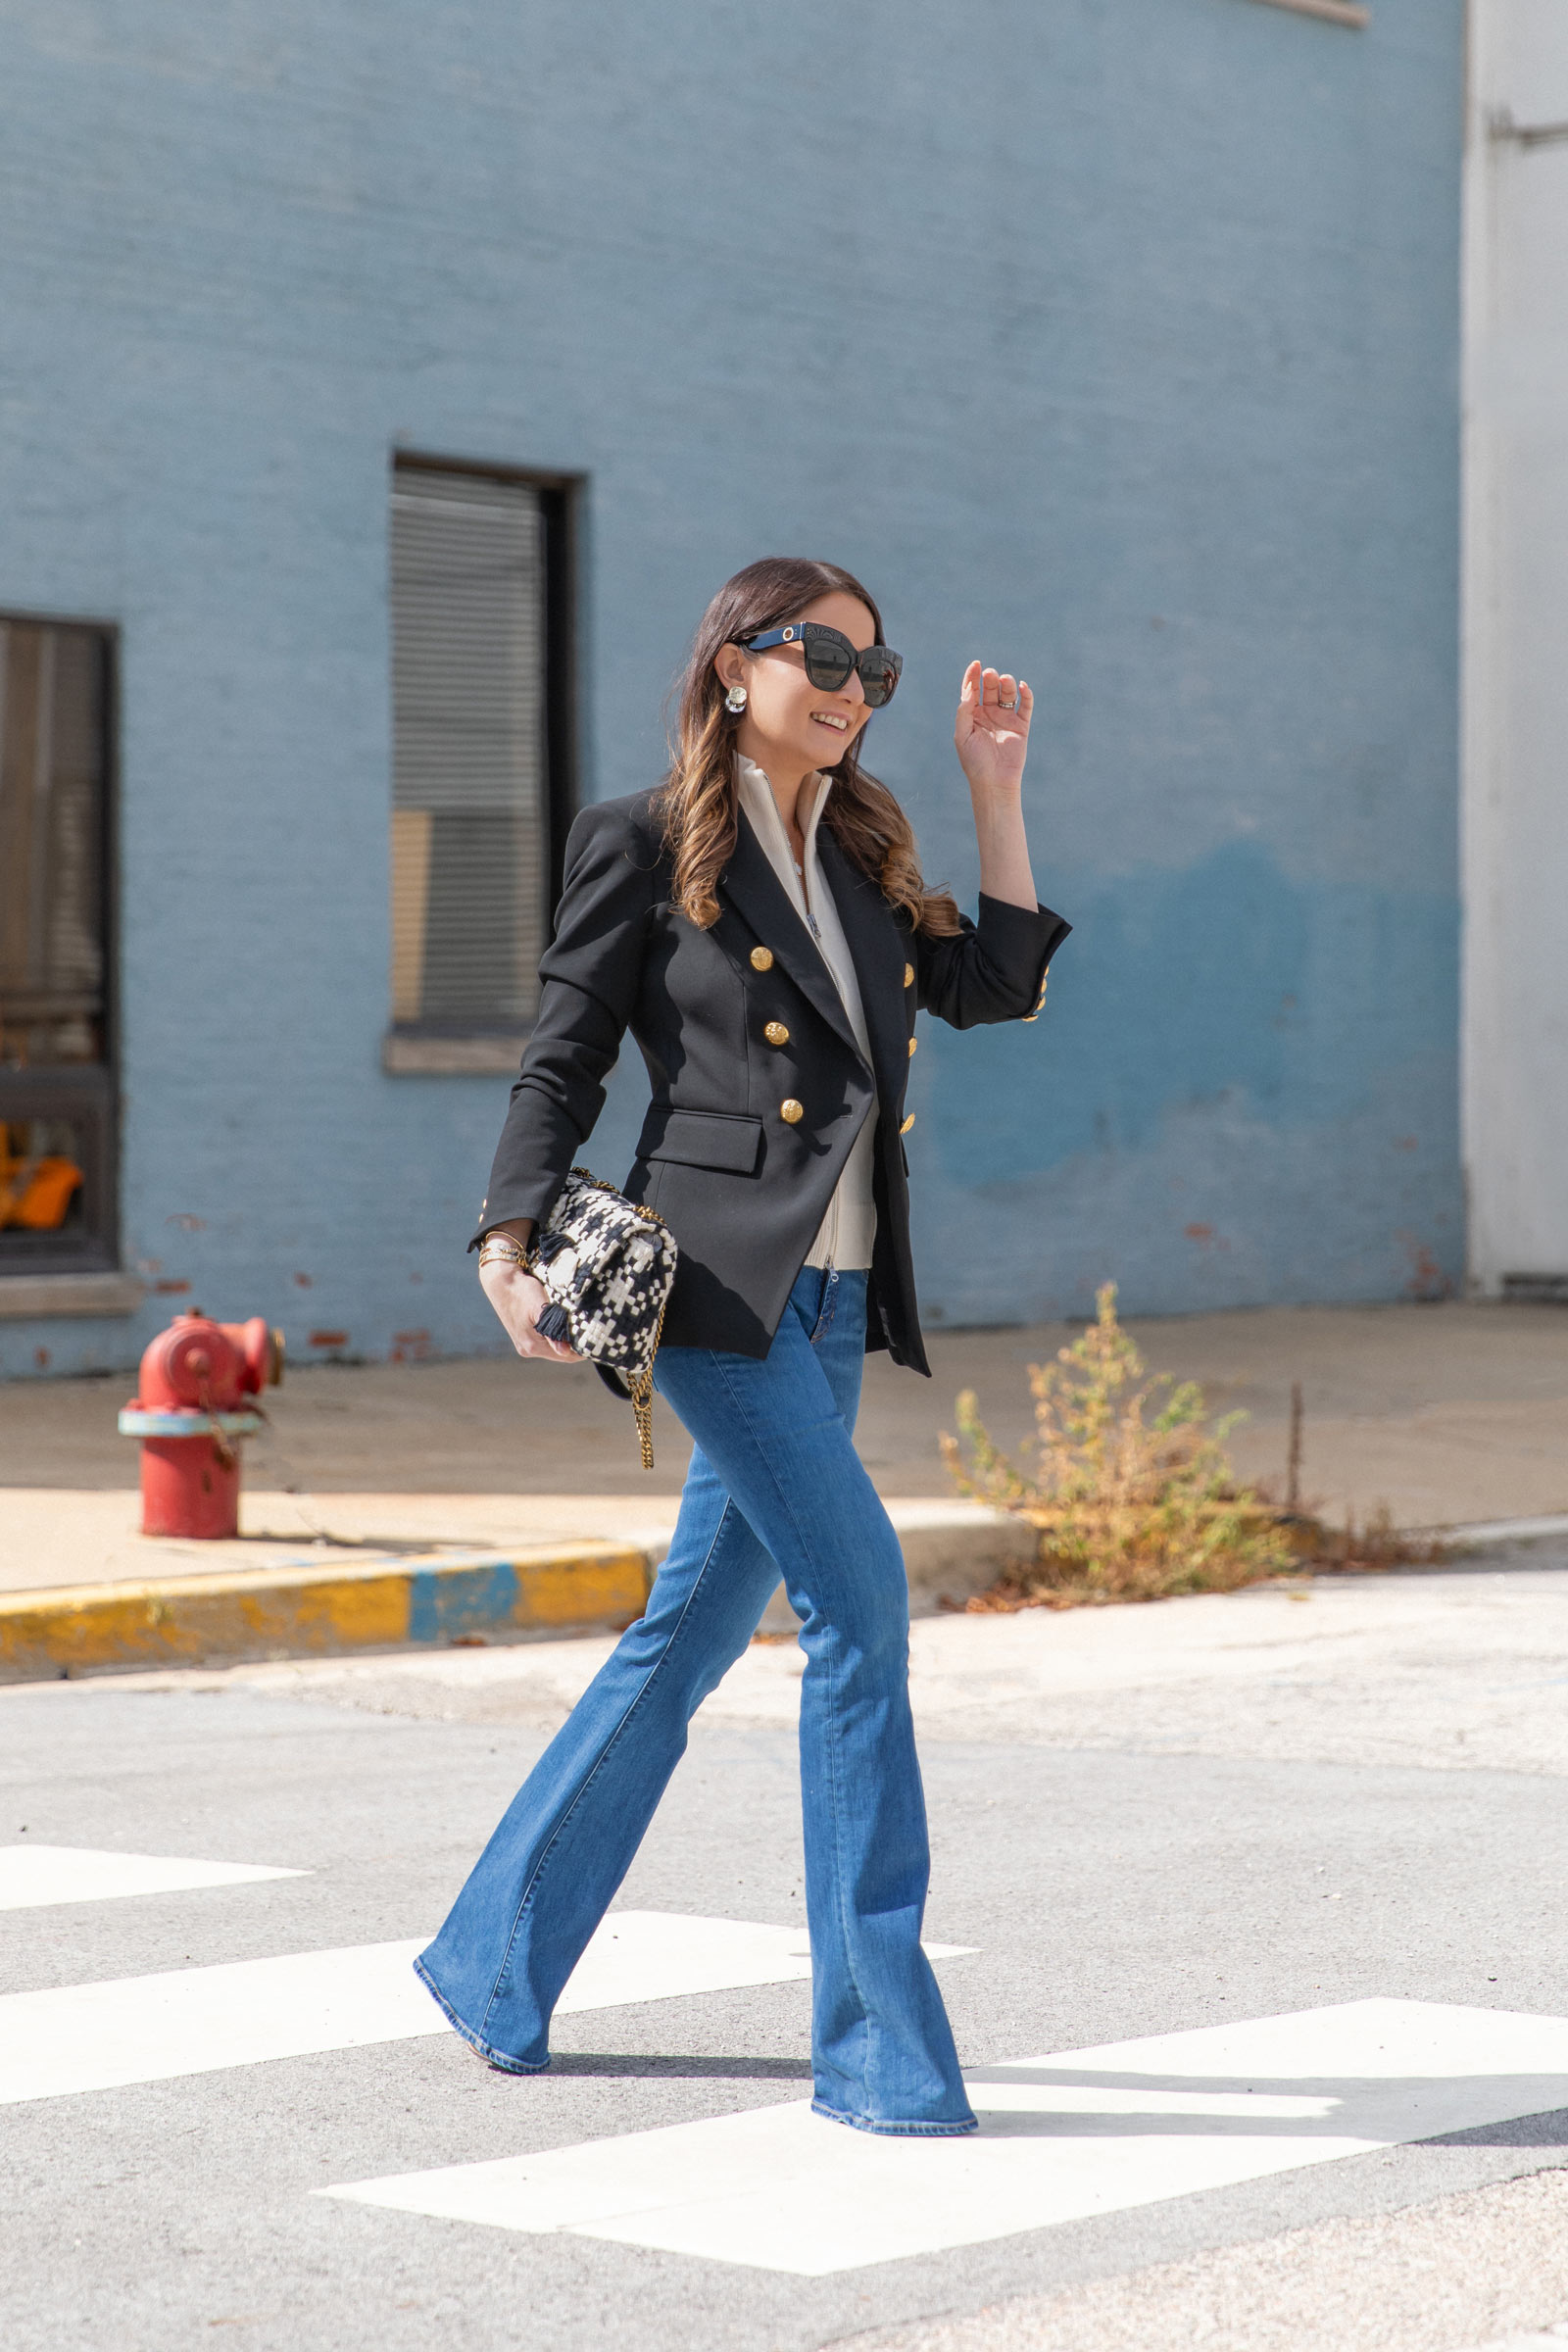 How to Style These Veronica Beard Skinny Flare Jeans - Style Charade